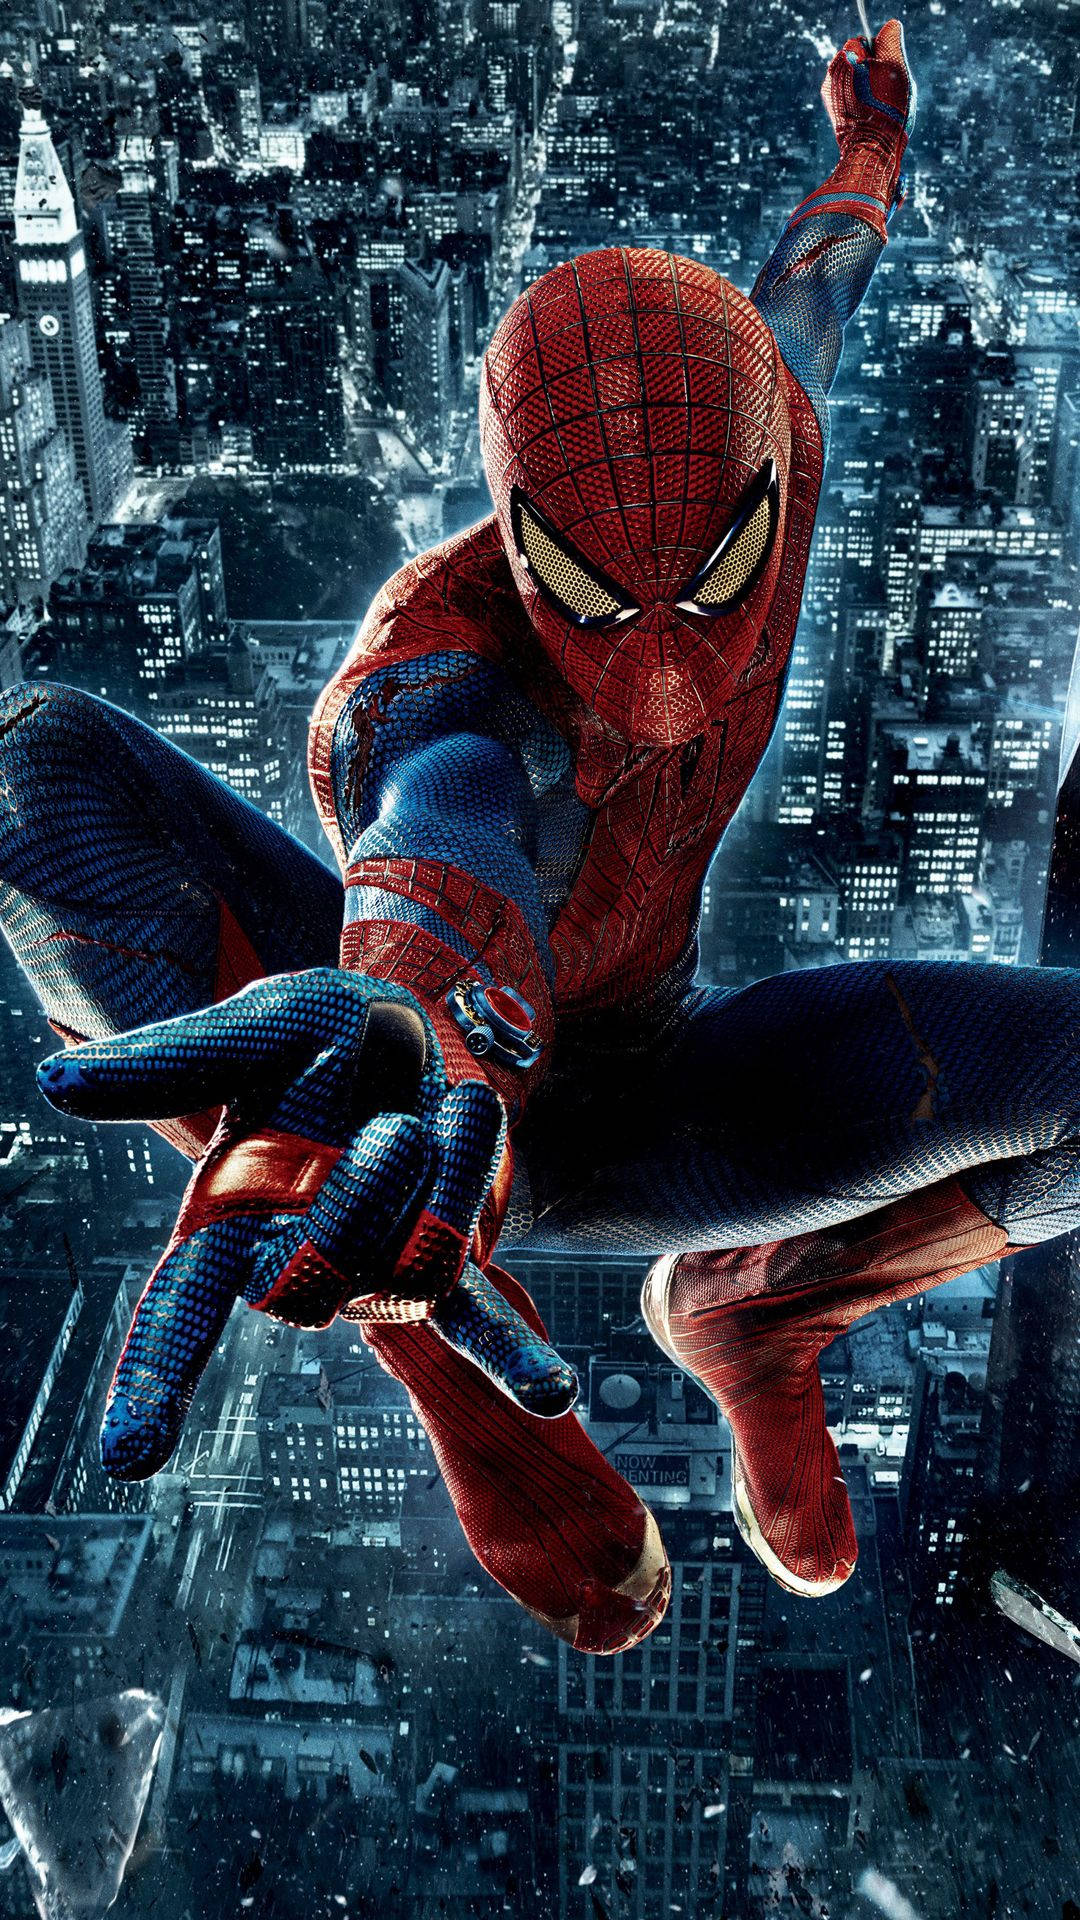 The Amazing Spider-Man 2 wallpaper 1080x1920 for iPhone 6 - 